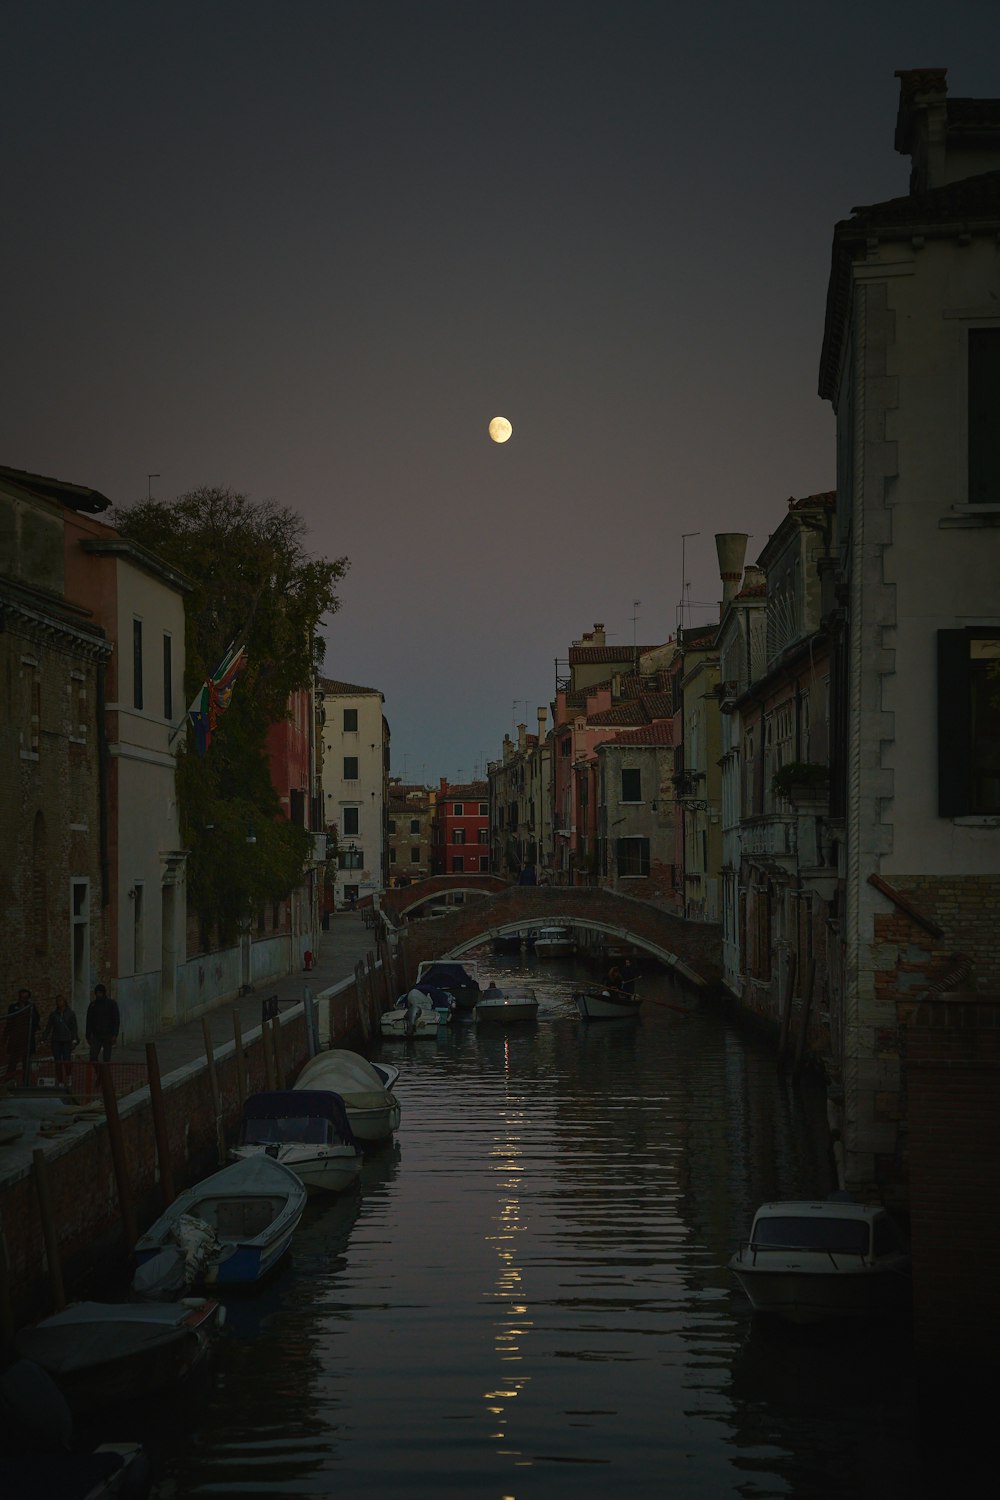 a full moon rises over a canal in a city